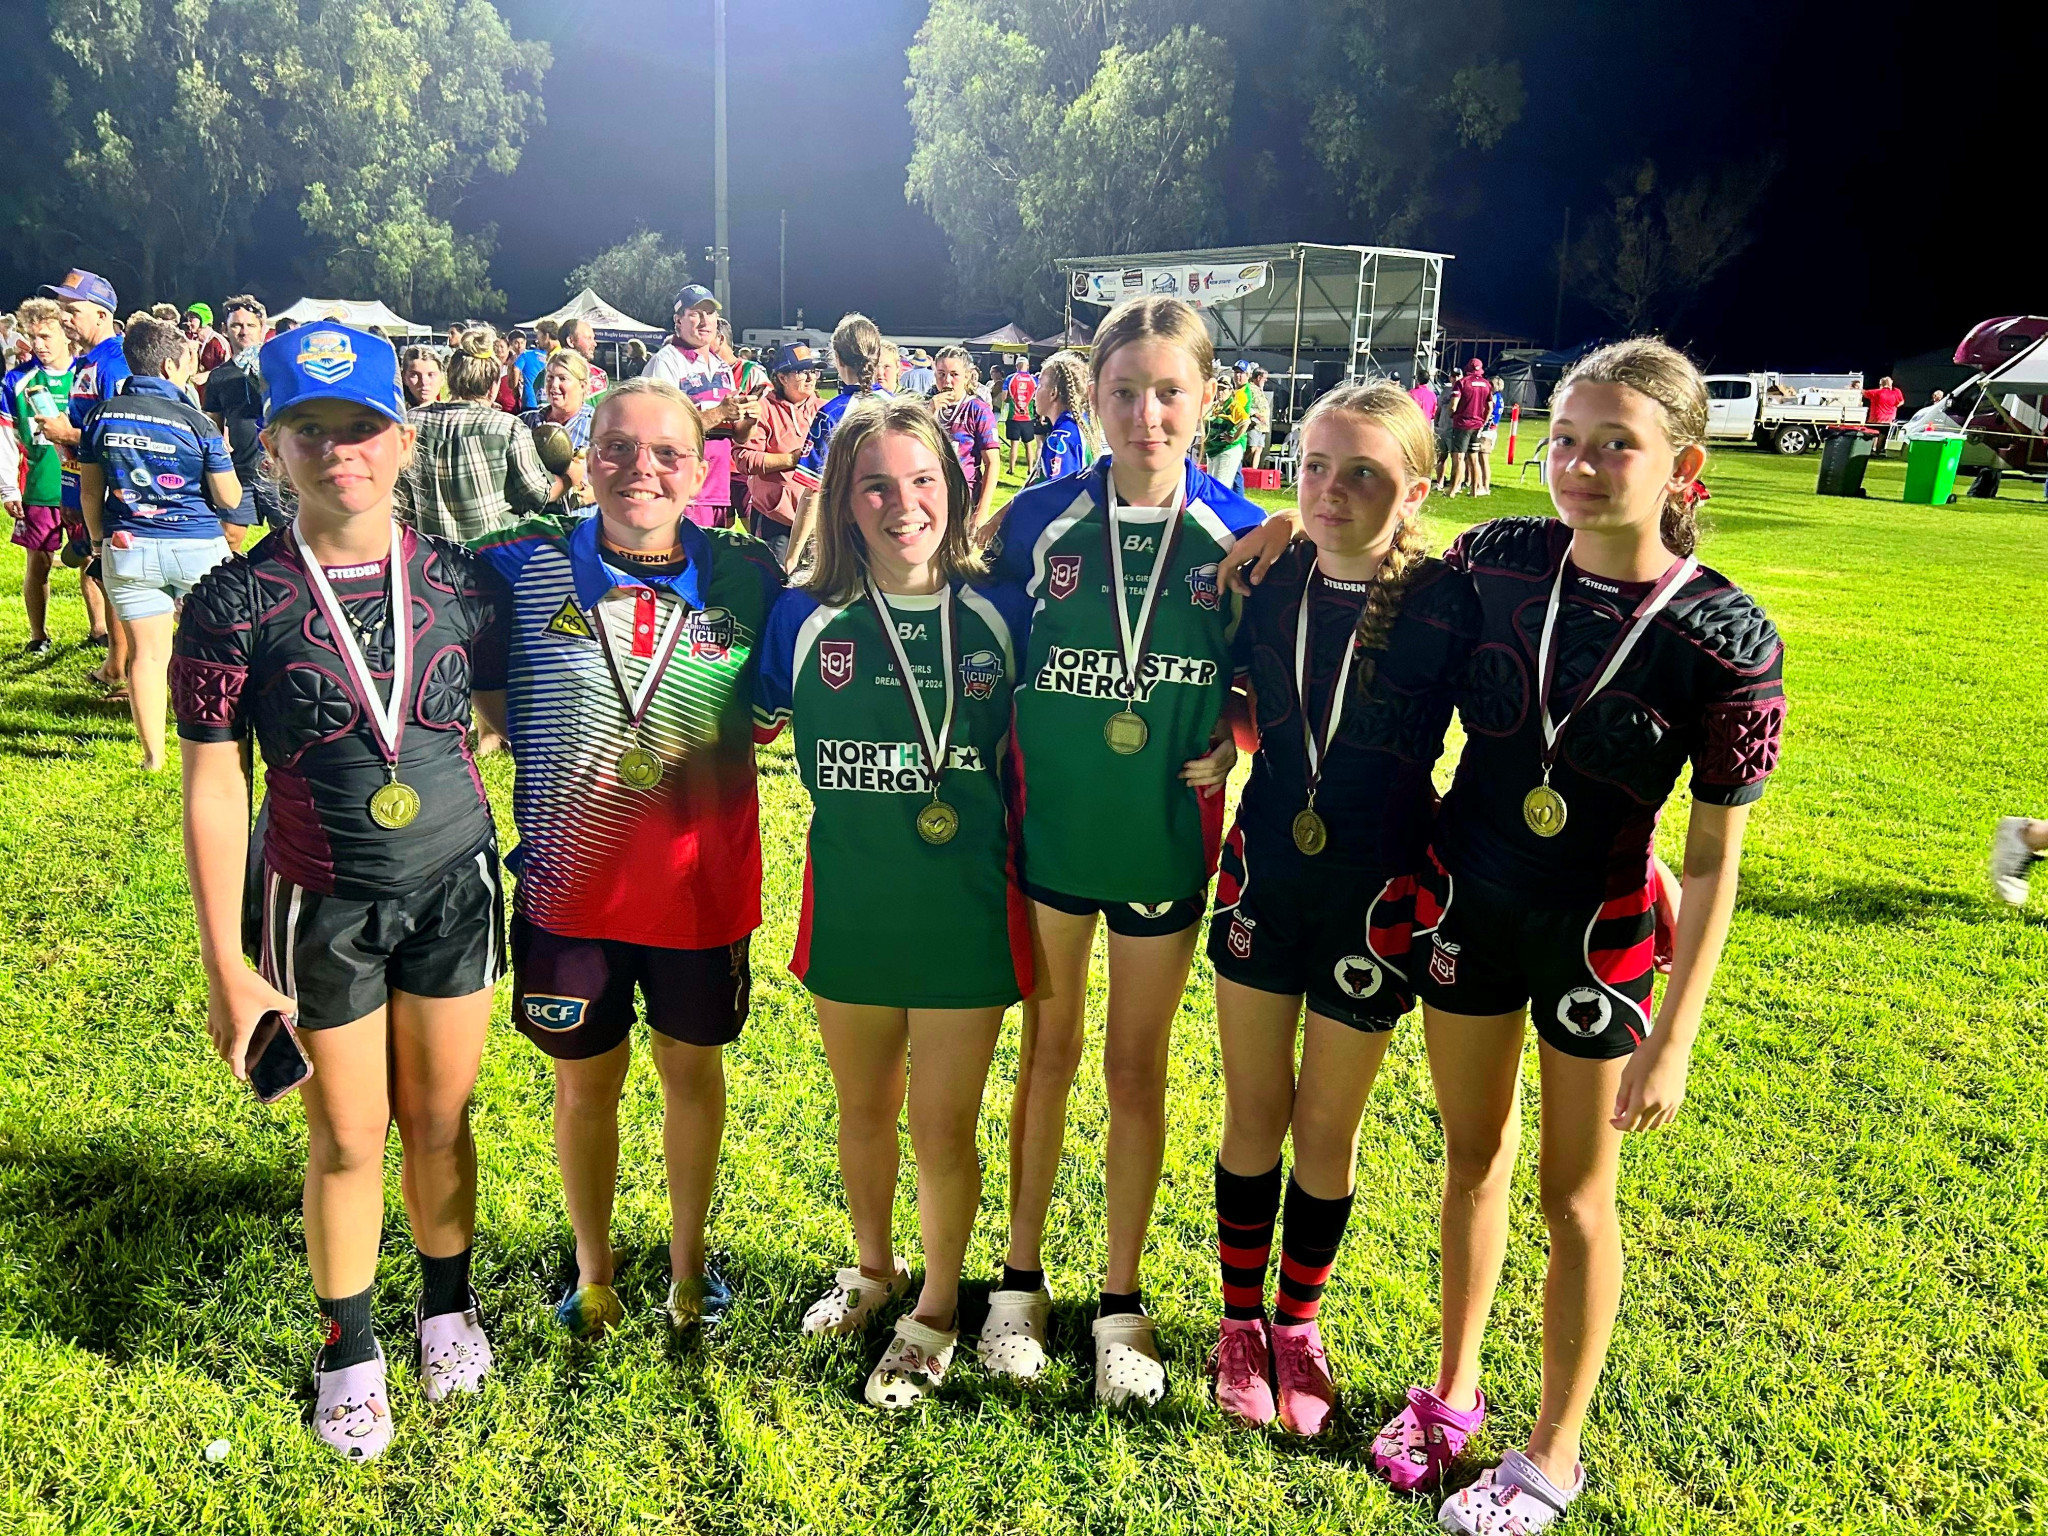 Stanley River U14 girls Emily Walker, Charlee Stanton, Cailin Darcy, Ruby Gauld, Mollie Sims and Kennedy Adams with their grand final medals.